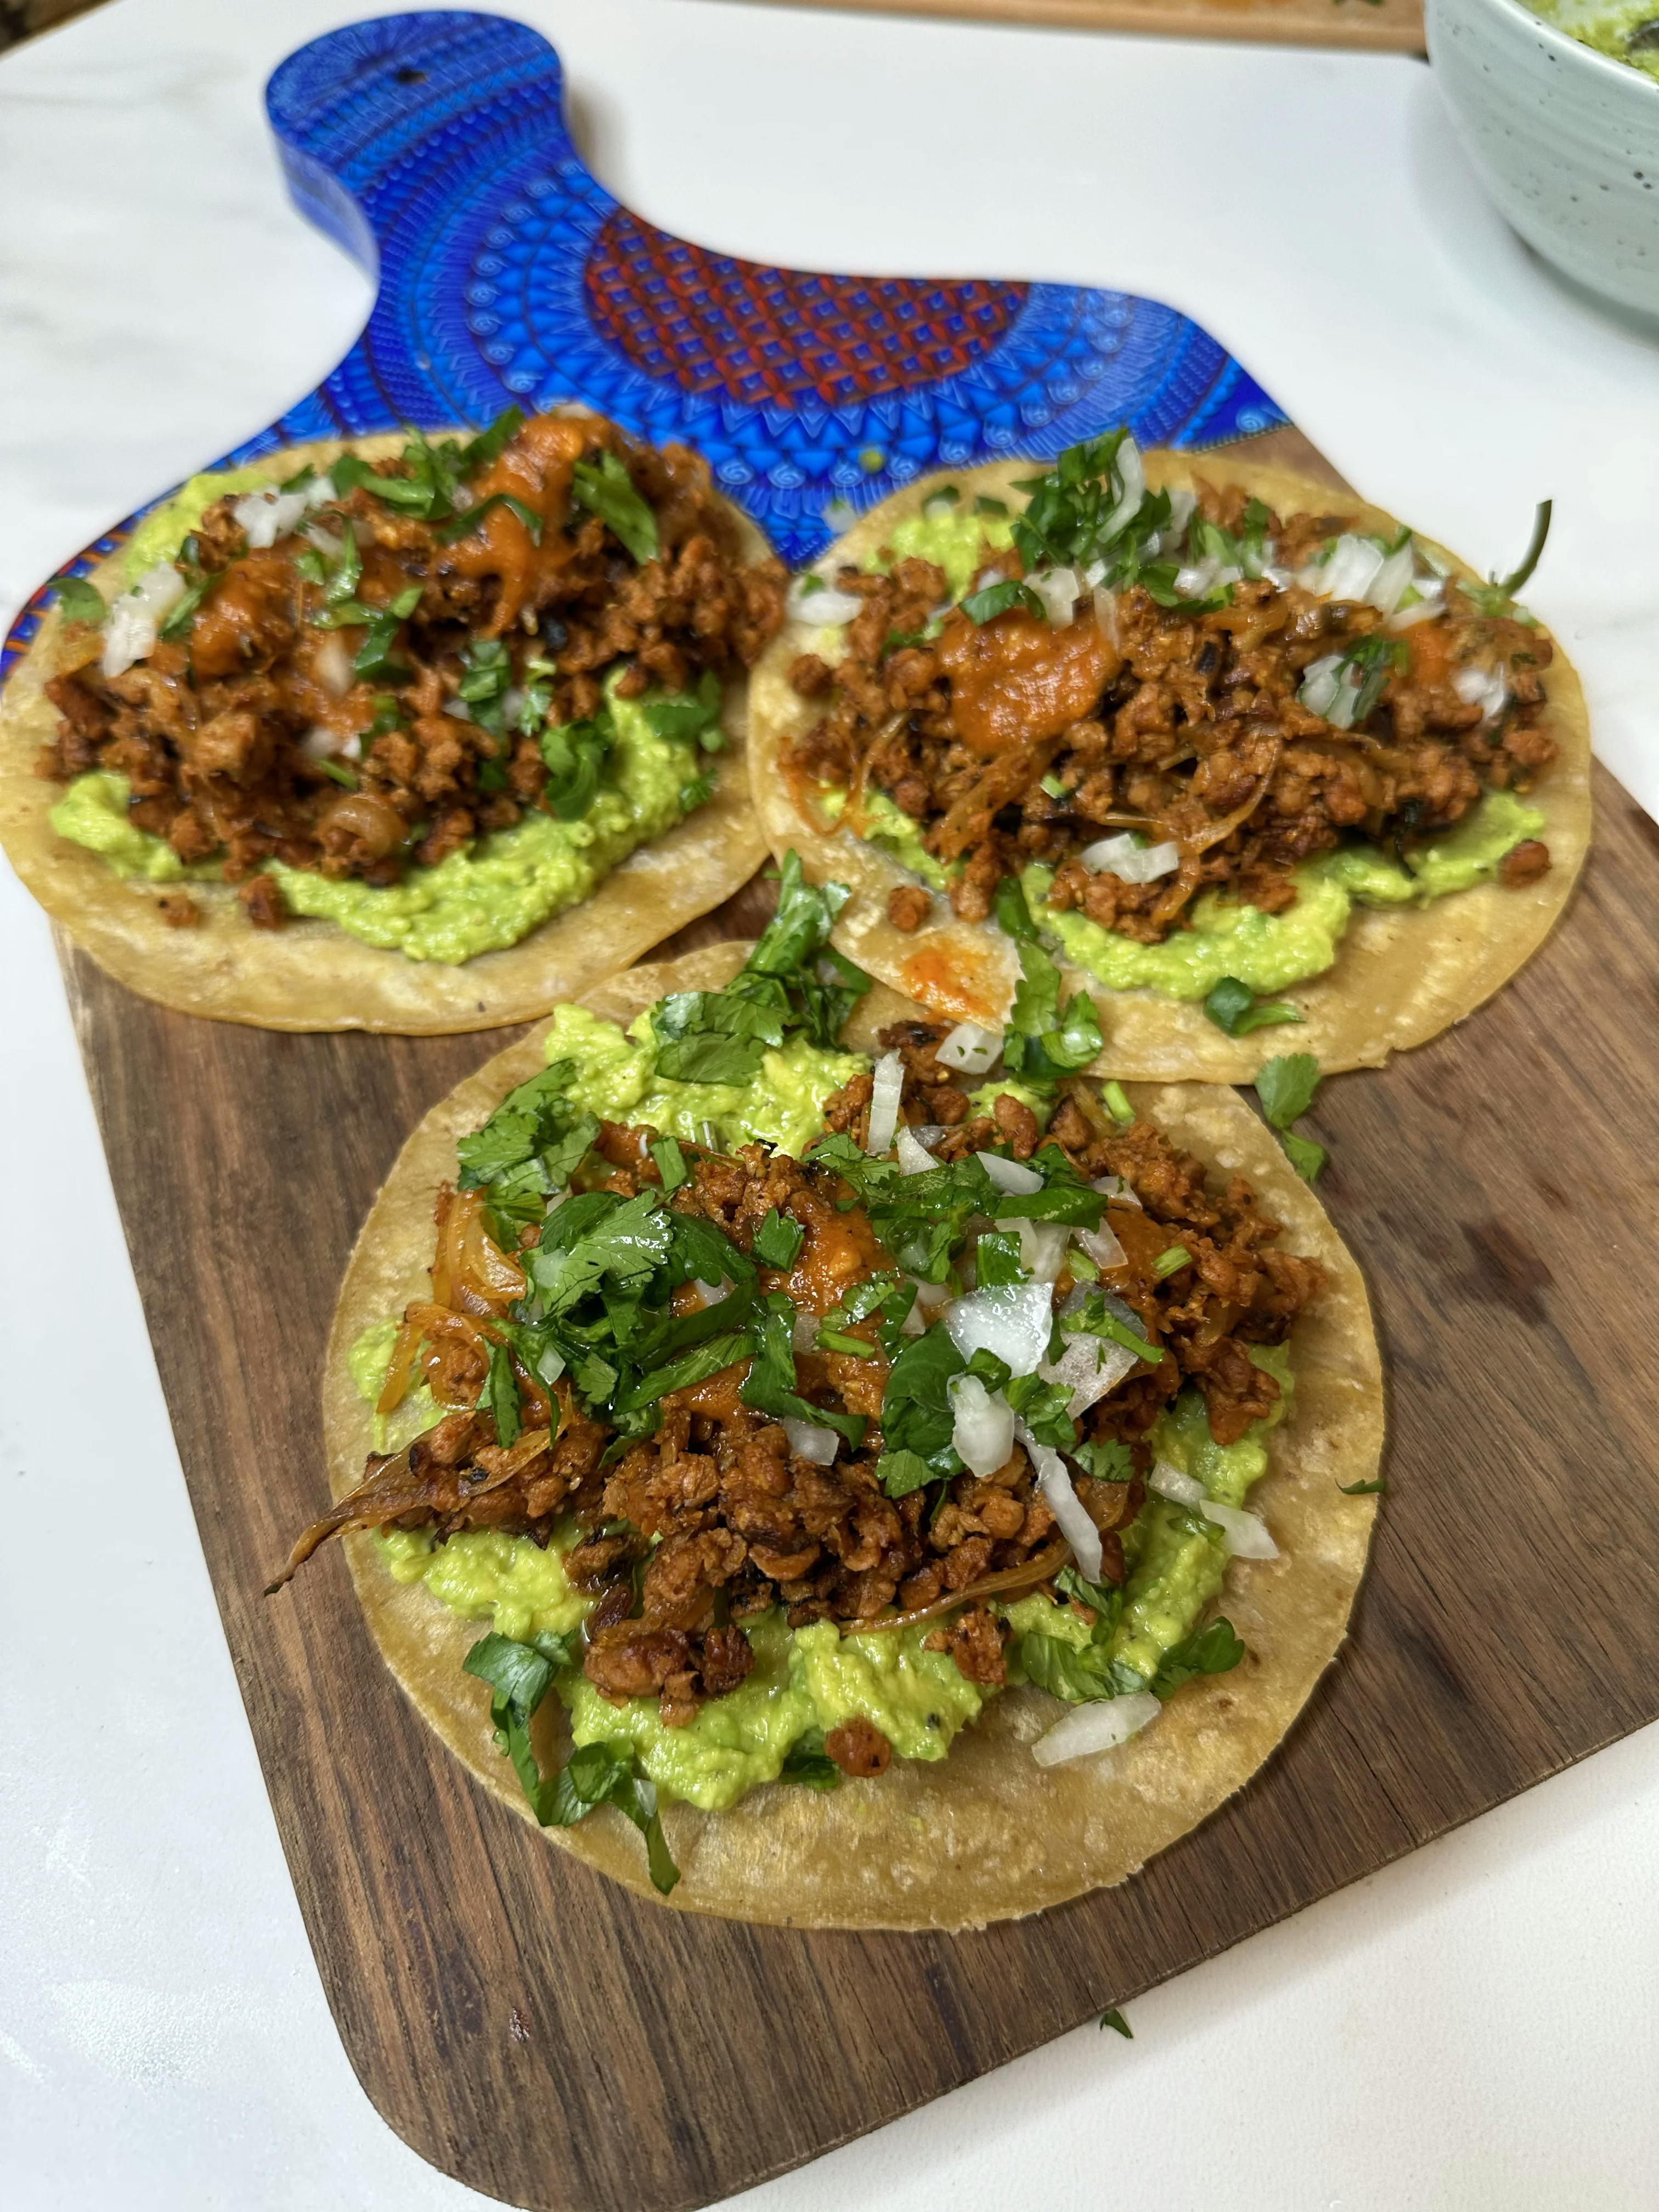 Picture for Soy Meat Tacos